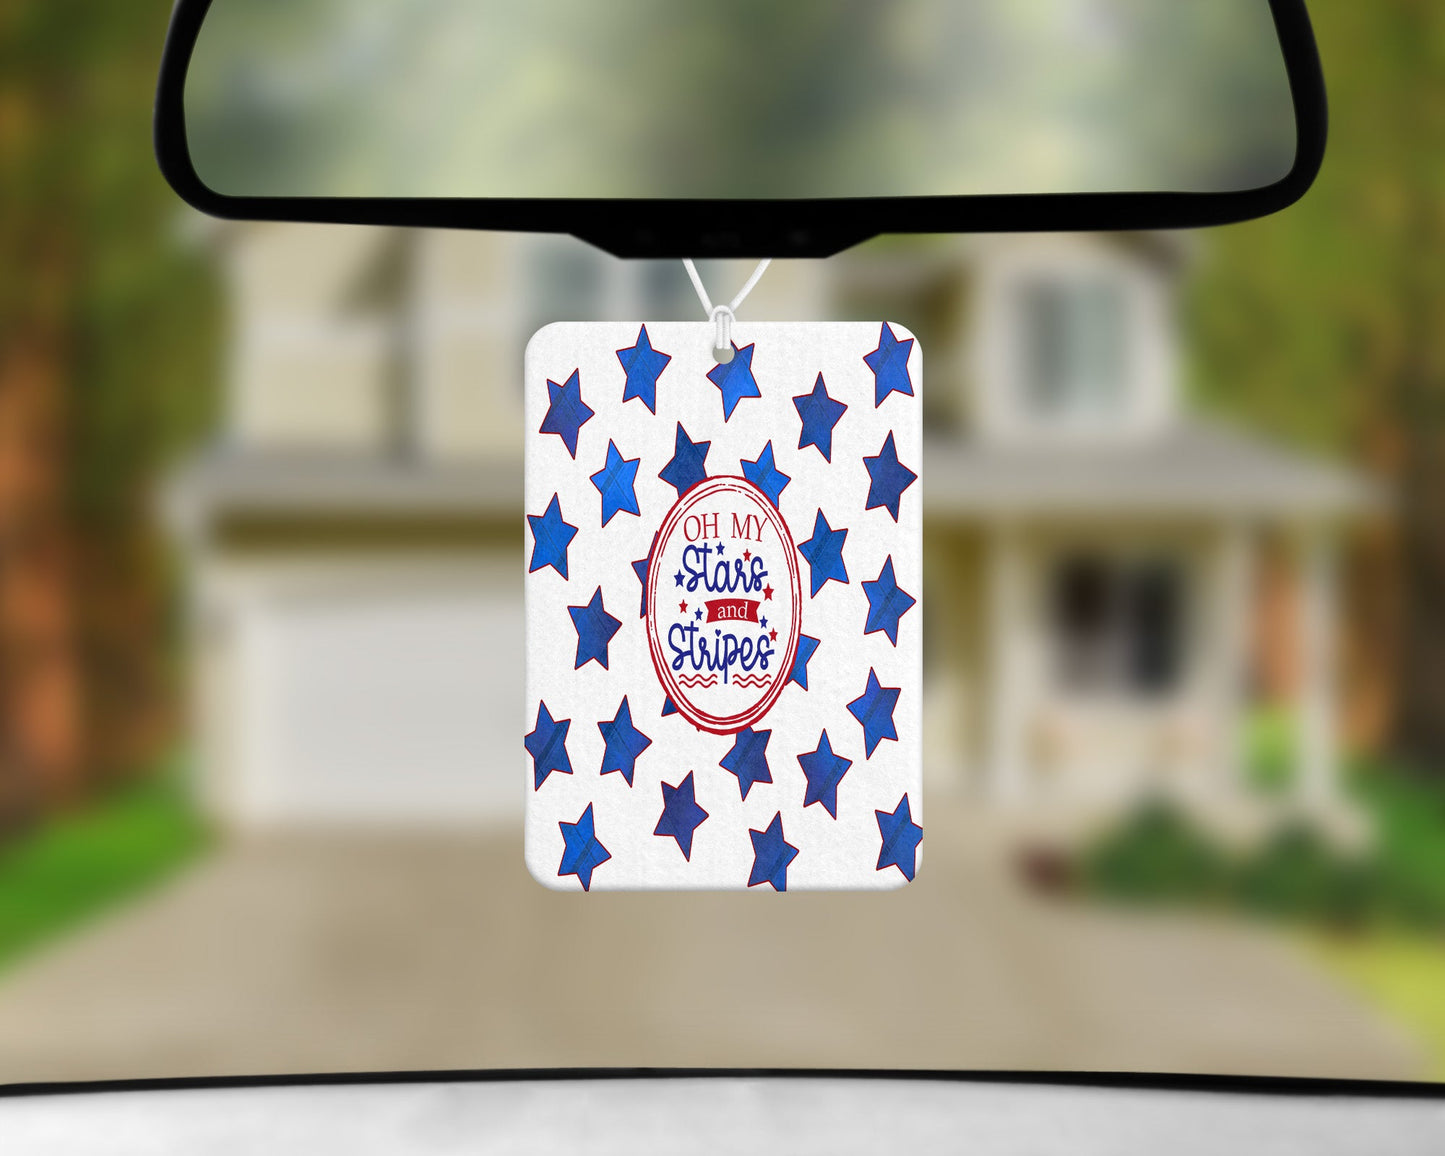 Oh My Stars and Stripes|Freshie|Includes Scent Bottle - Vehicle Air Freshener